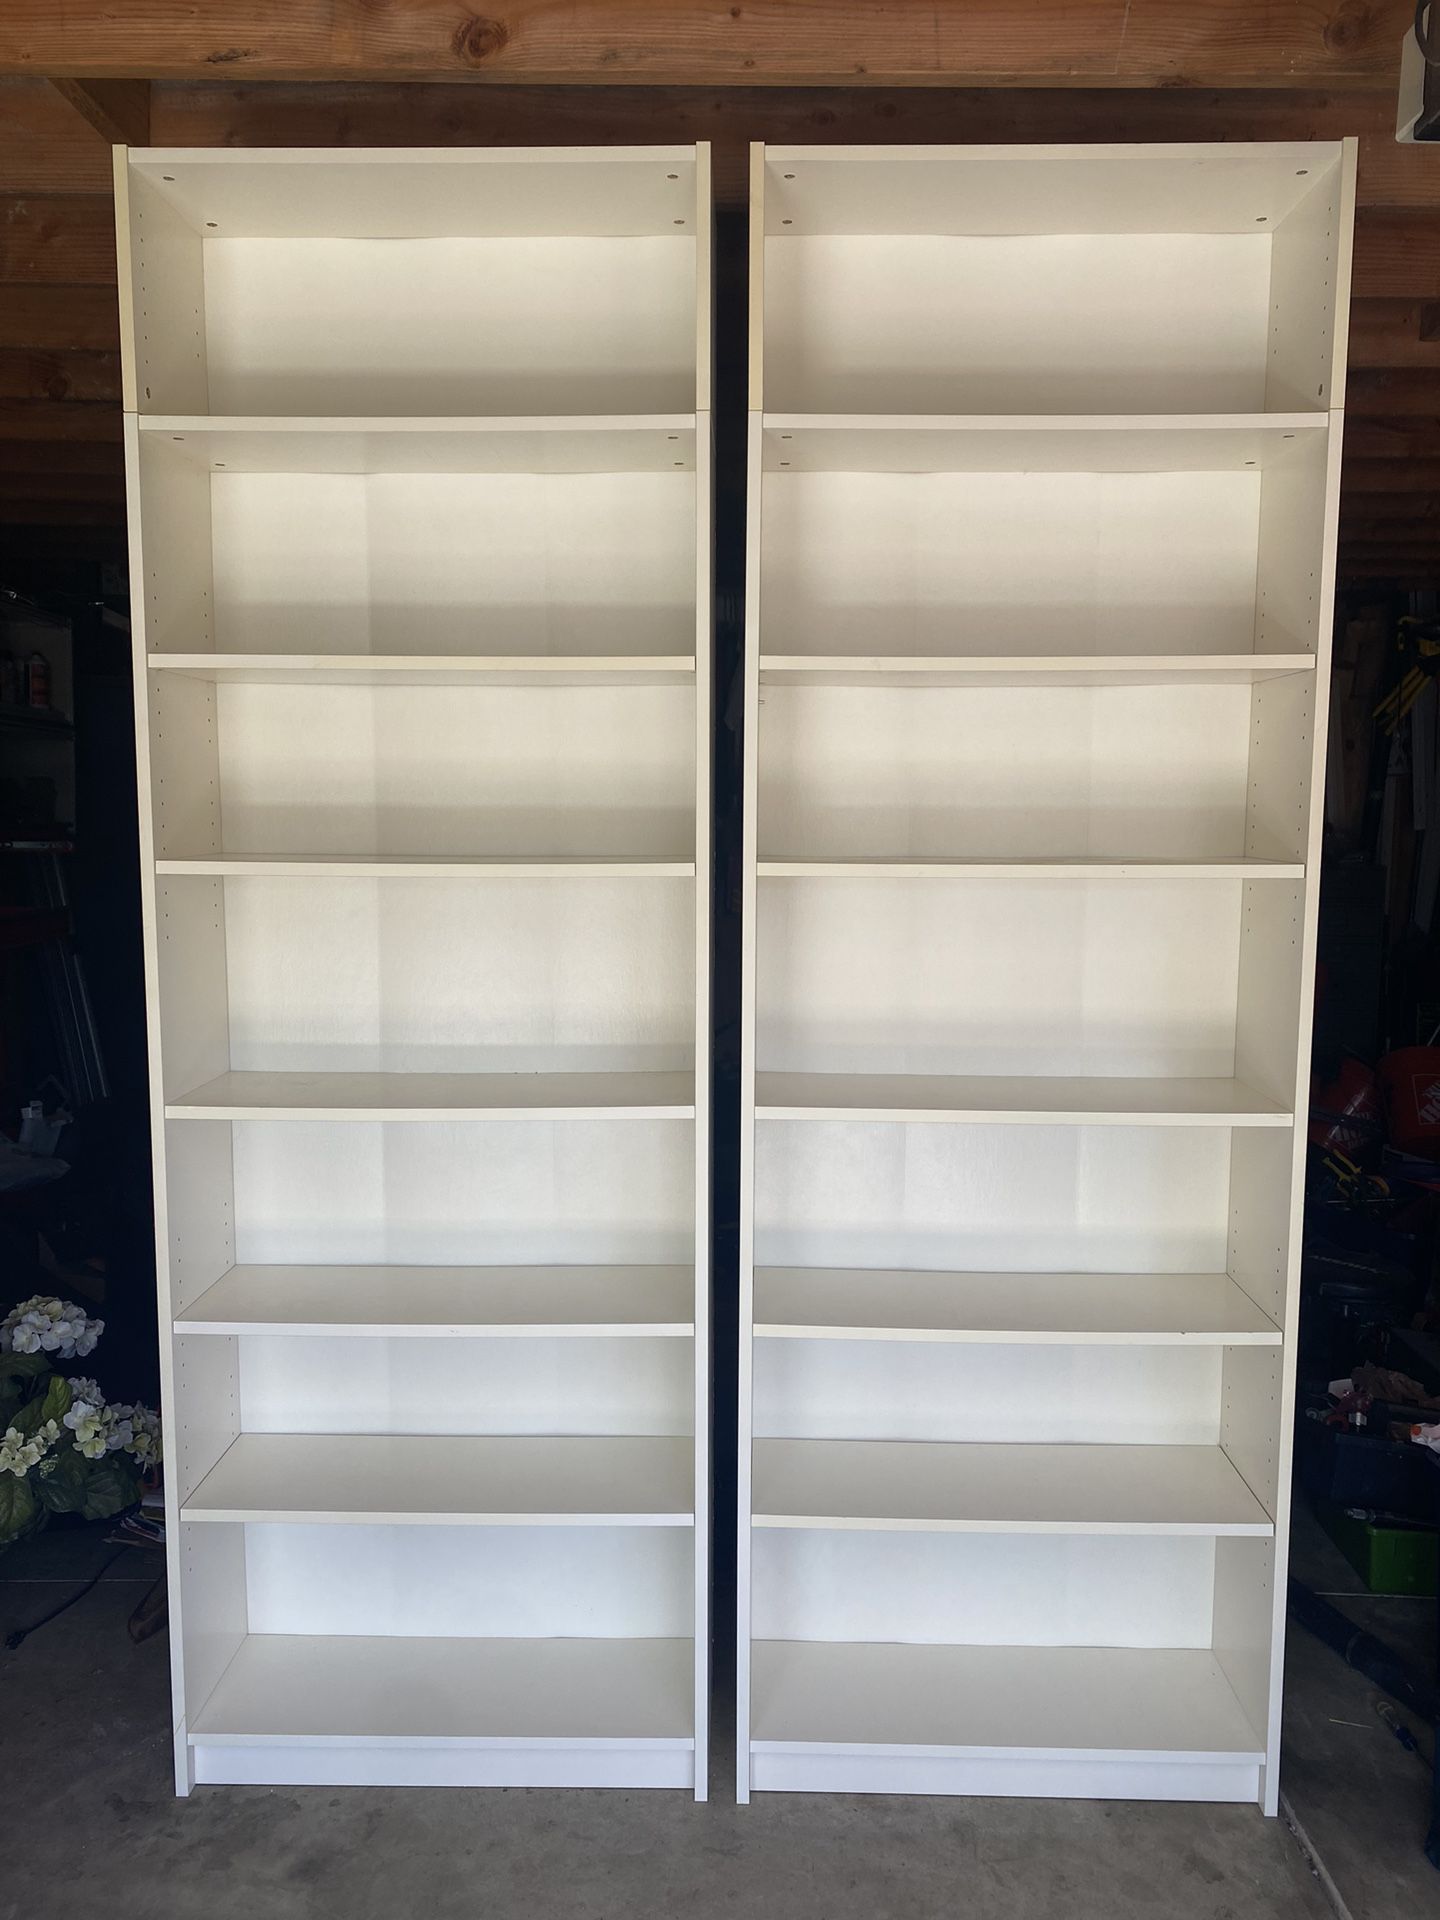 IKEA Billy Bookcase with extension top shelf. The other shelves are adjustable as well $75 each